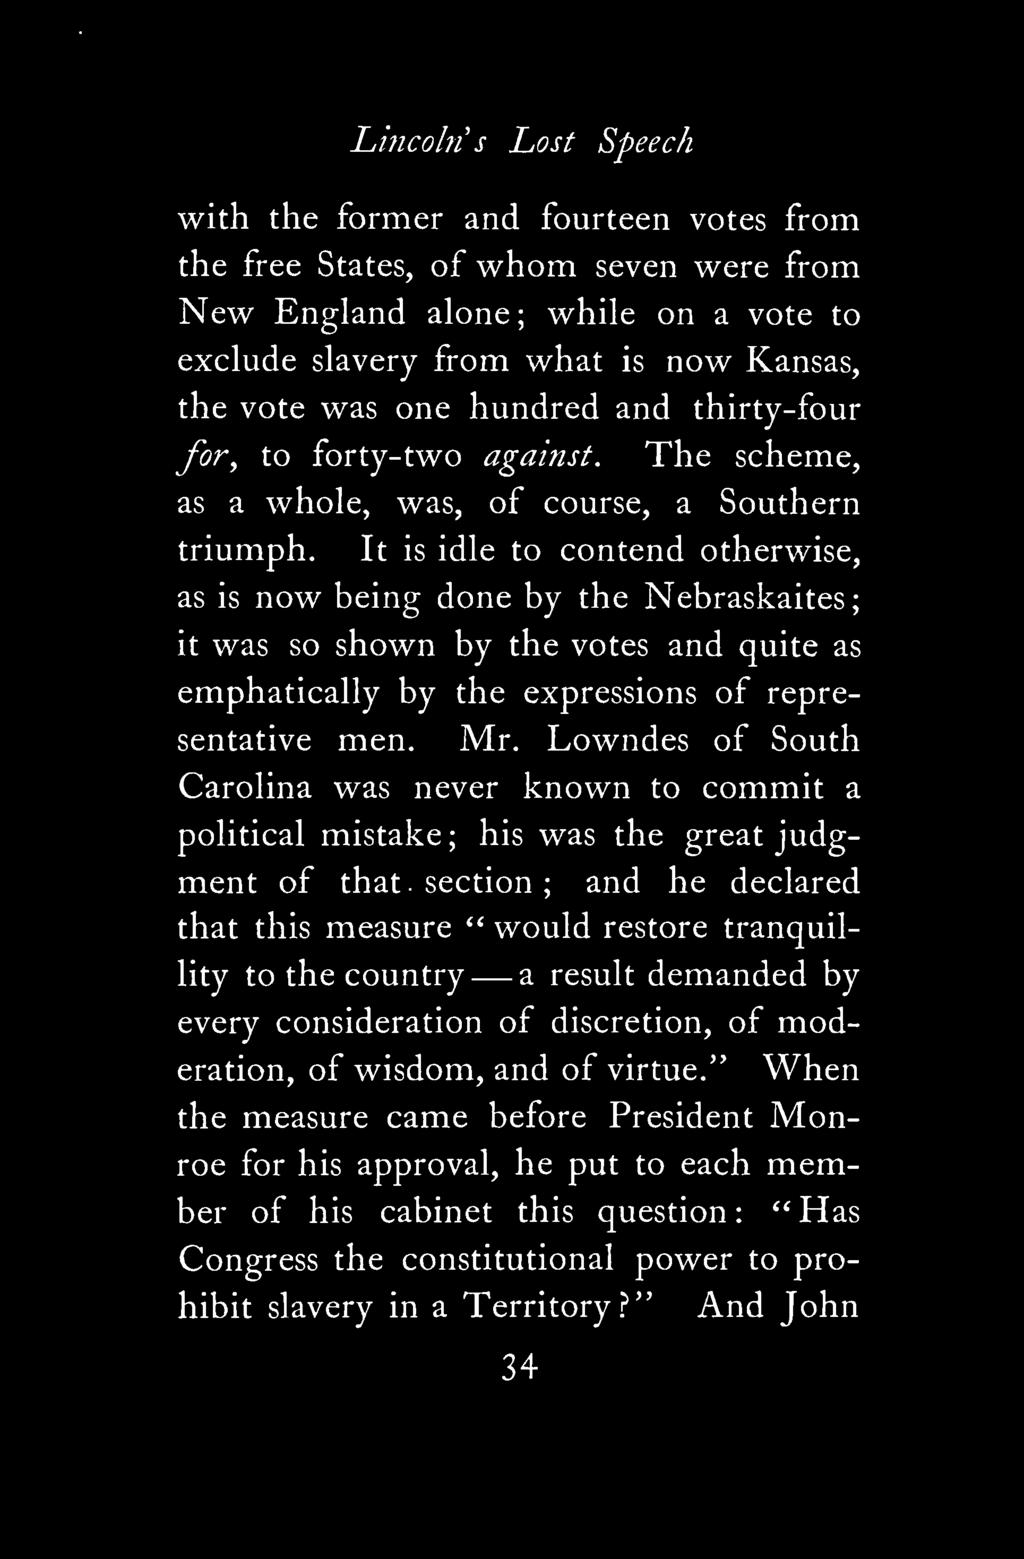 Lincoln s Lost Speech with the former and fourteen votes from the free States, of whom seven were from New England alone; while on a vote to exclude slavery from what is now Kansas, the vote was one